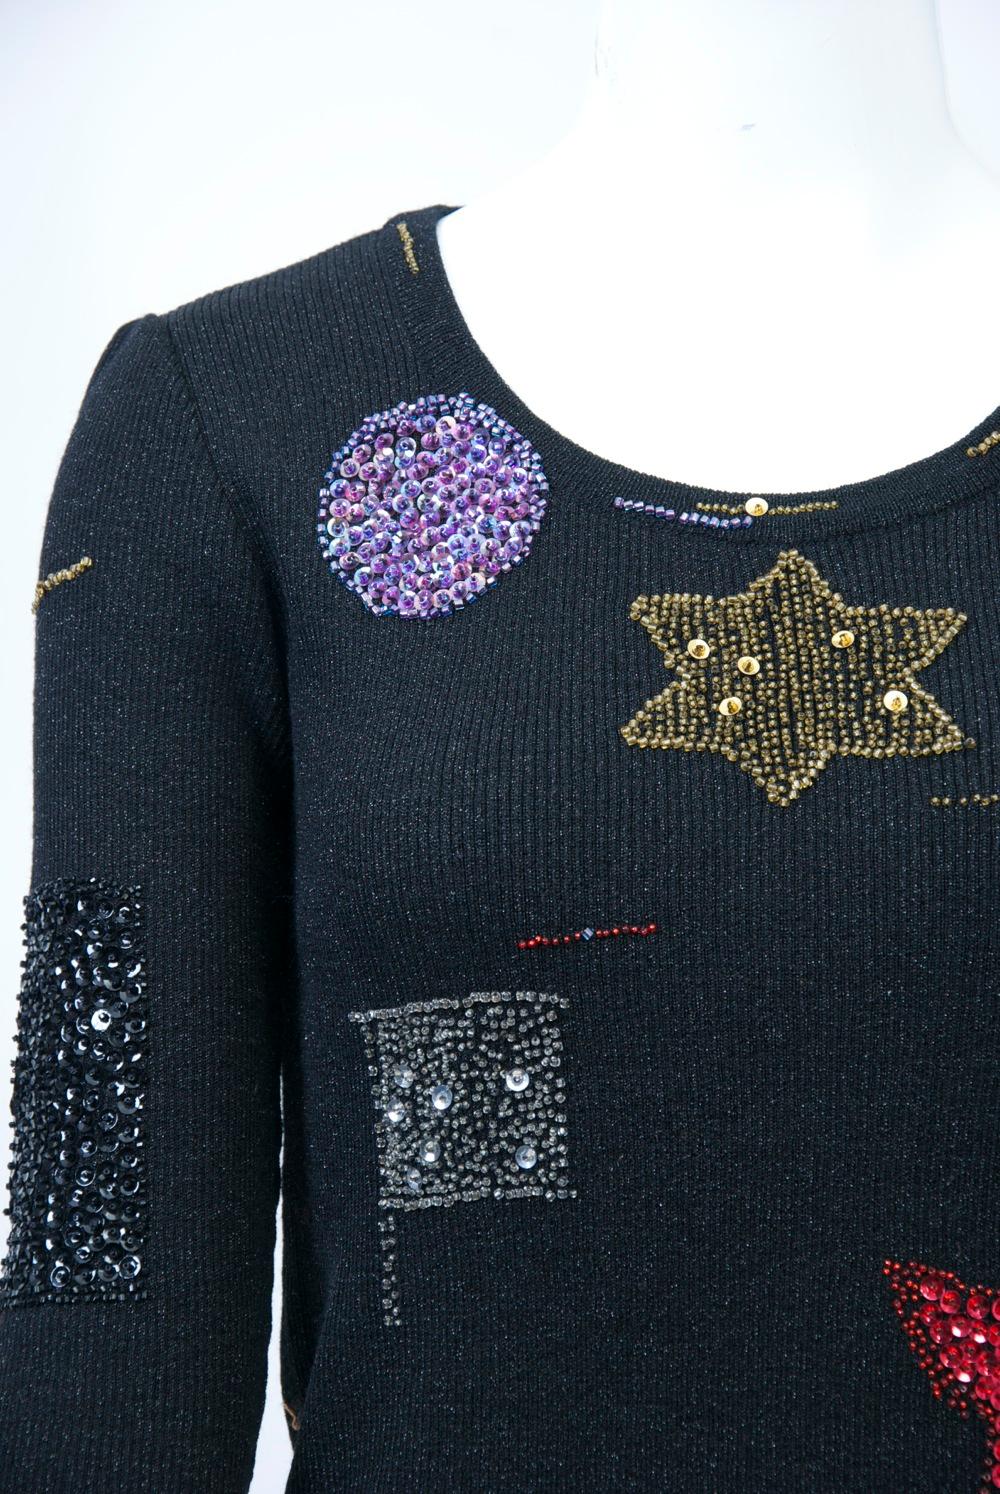 Hanae Mori ribbed black pullover featuring beaded and sequined ornaments of stars, circles, flags, and birds in various colors. Scoop neck, long sleeves. Size M.